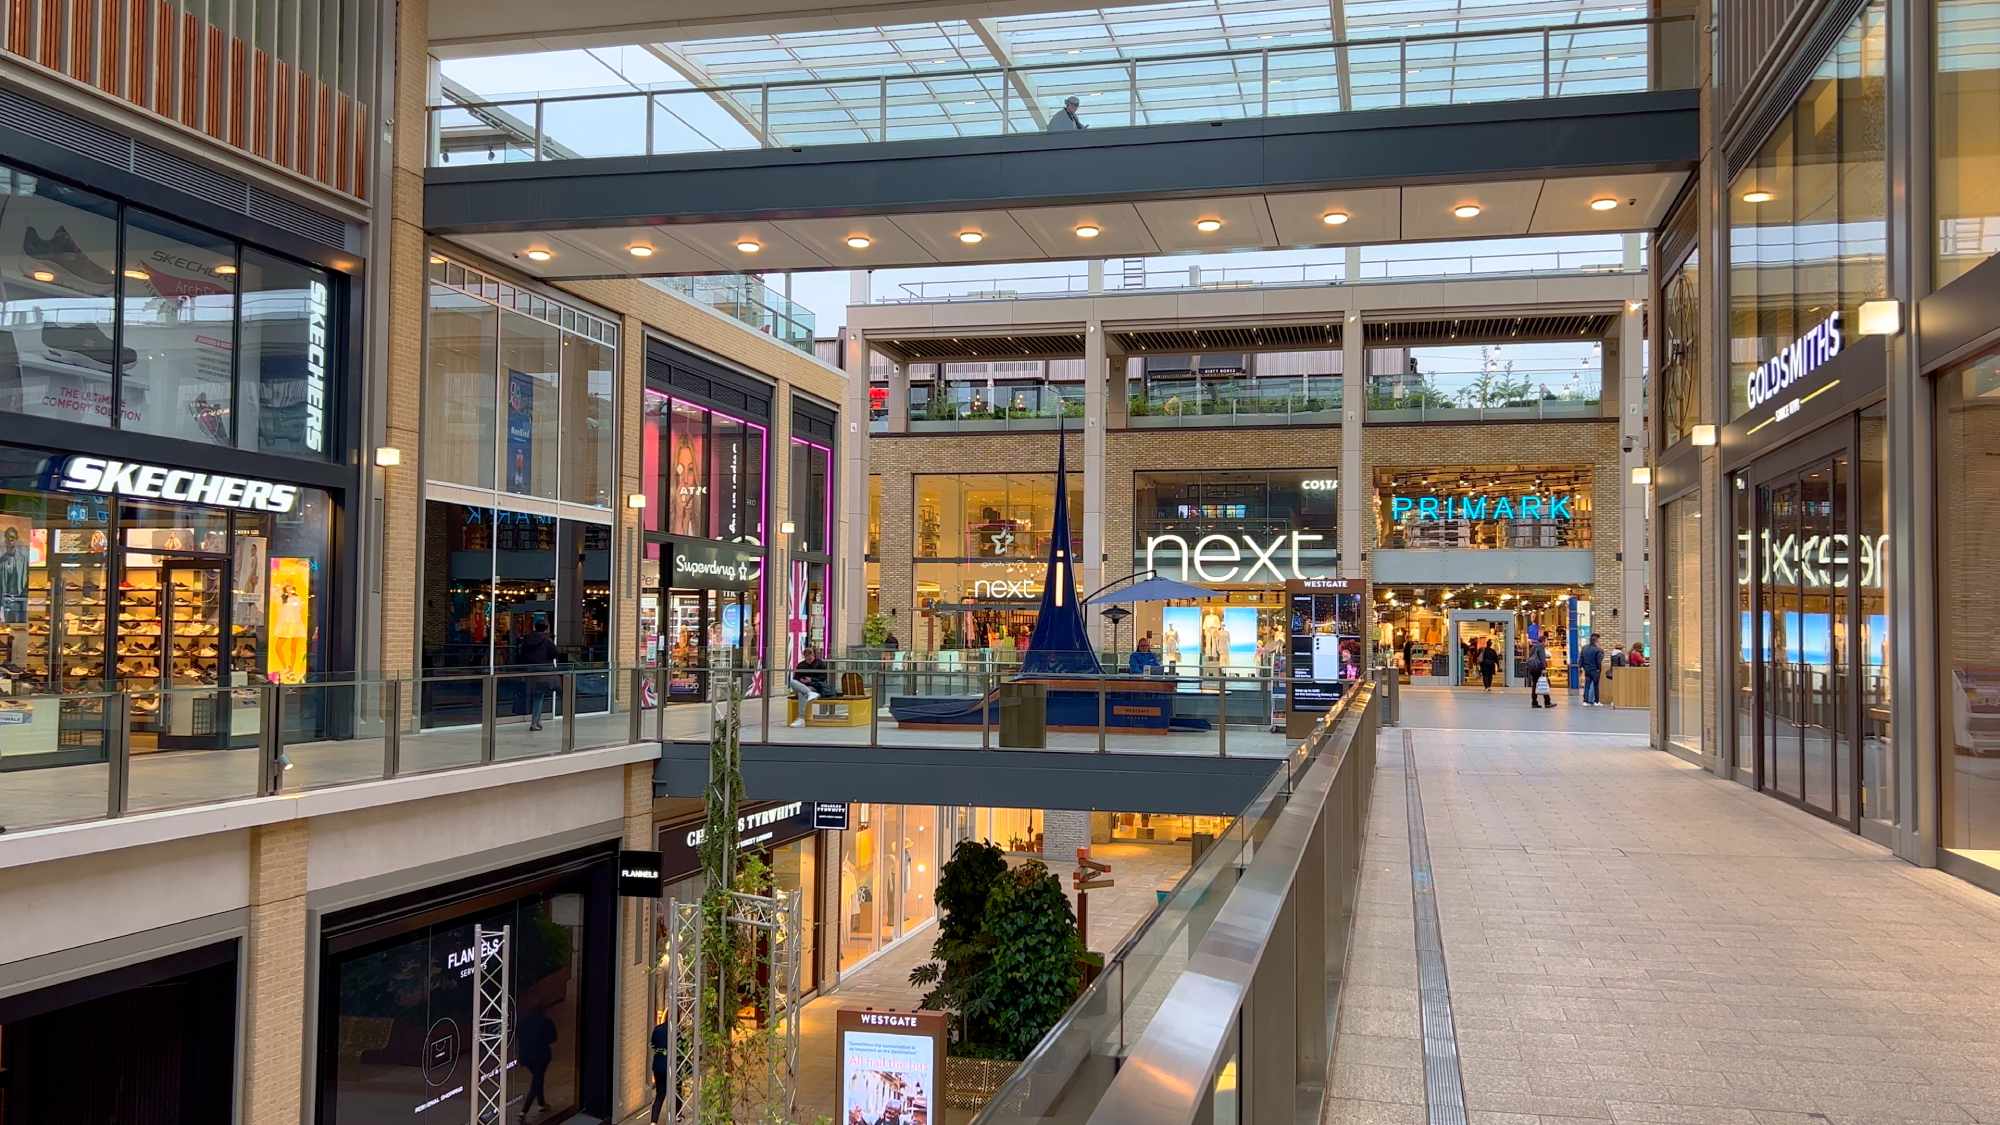 shops in a UK shopping mall